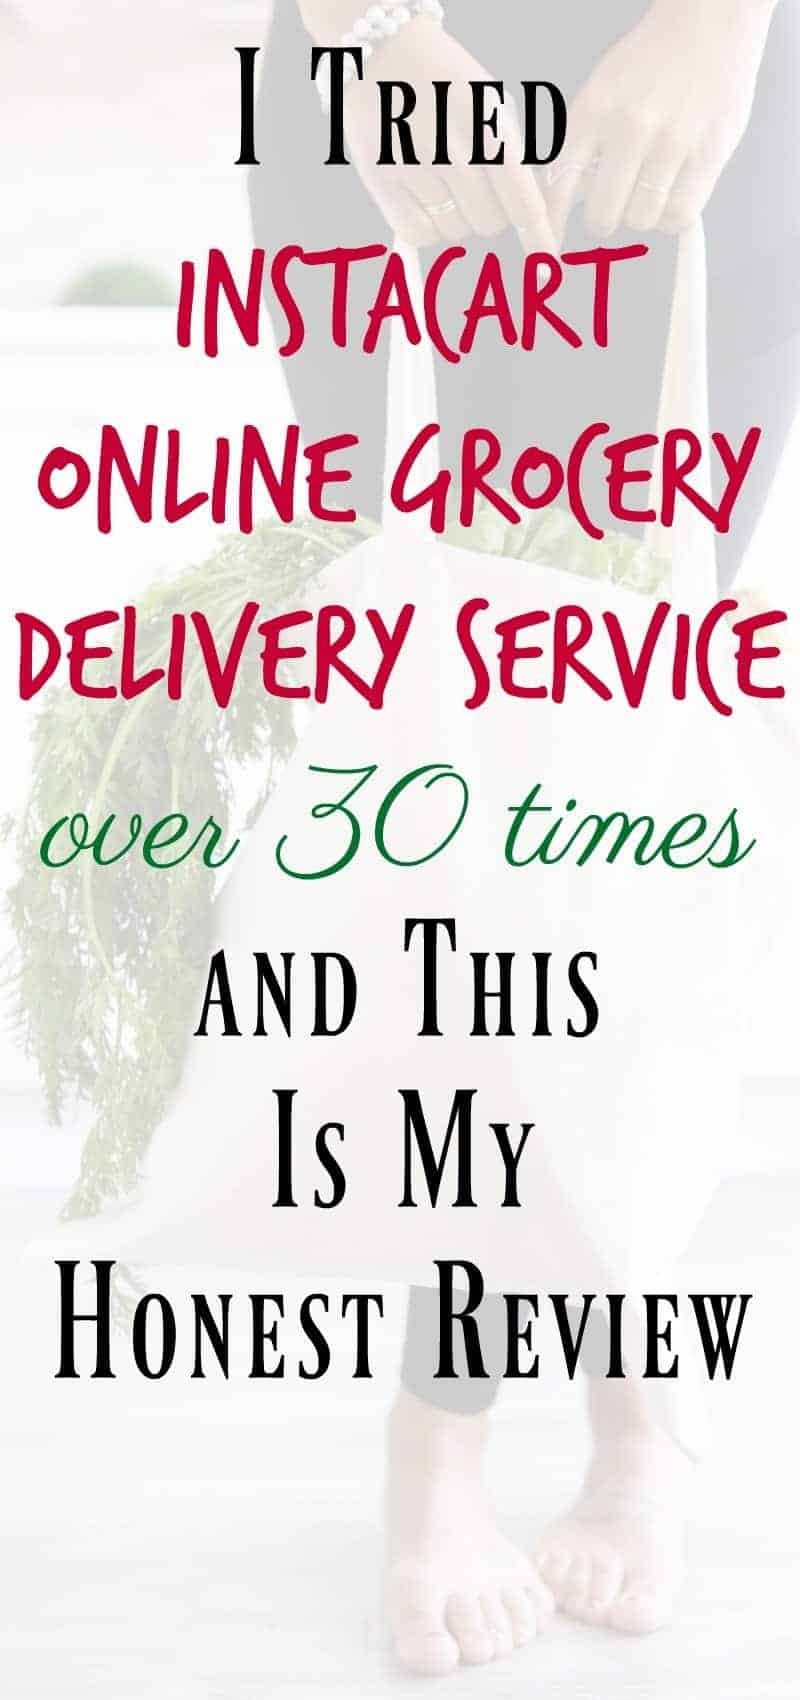 Instacart Online Grocery Delivery Service Review